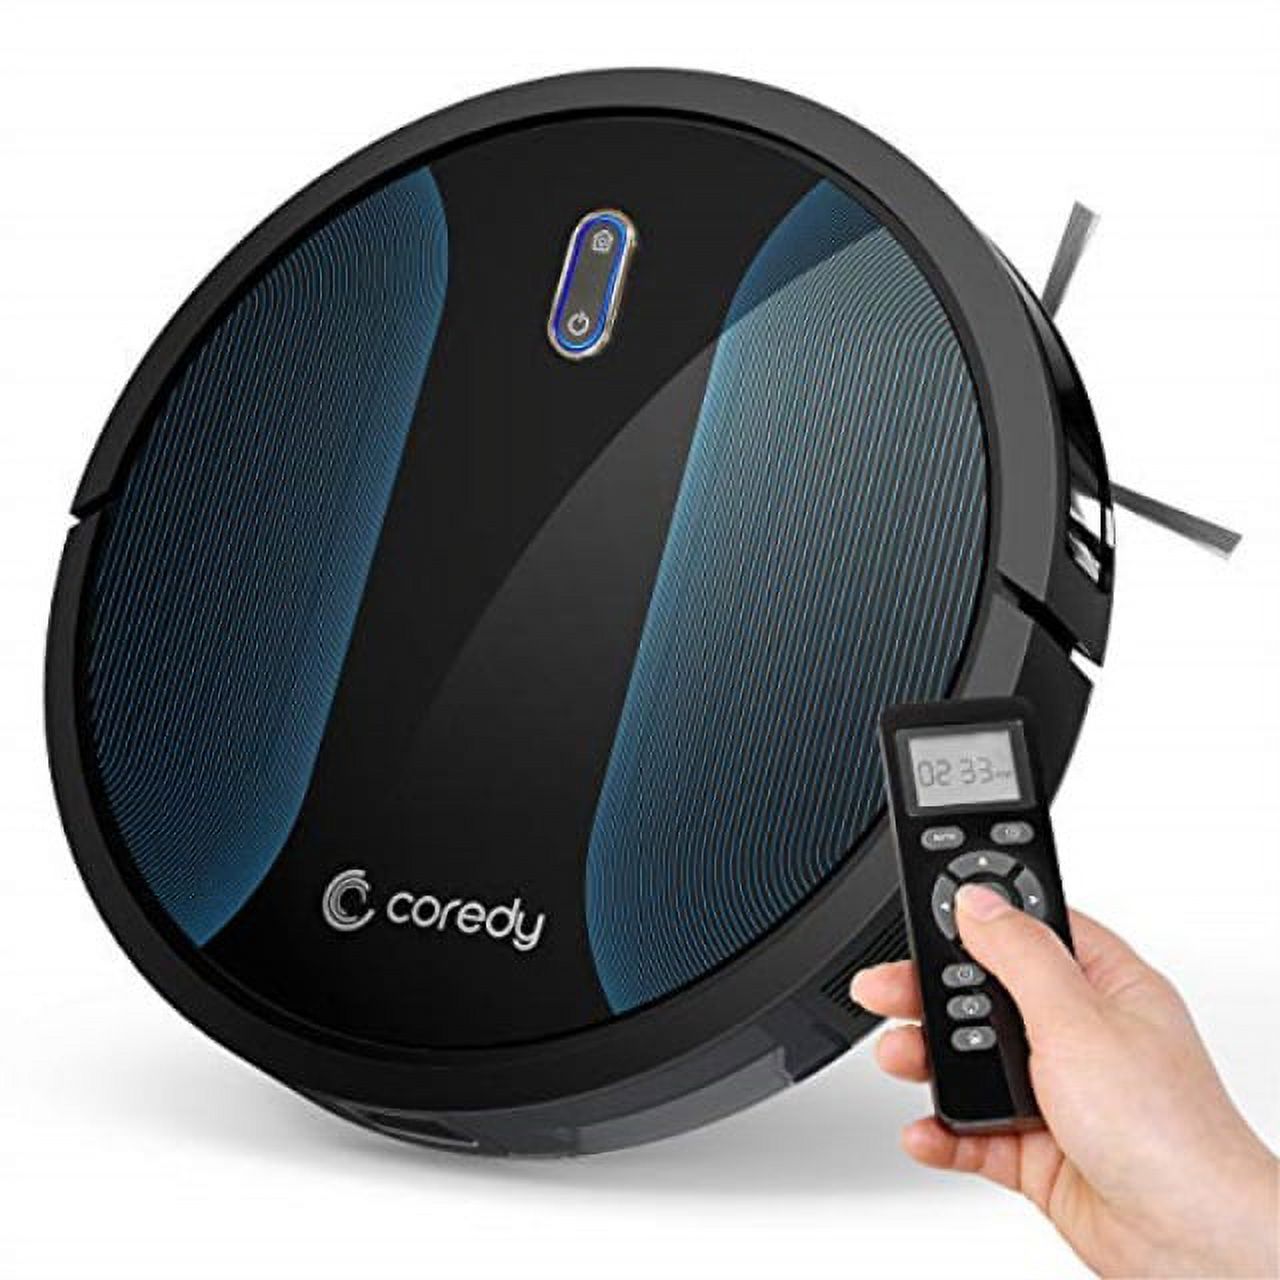 Coredy Robot Vacuum Cleaner, Fully Upgraded, Boundary Strip Supported, 360Â° Smart Sensor Protection, 1400pa Max Suction, Super Quiet, Self-Charge Robotic Vacuum, Cleans Pet Fur, Hard Floor to Carpet - image 1 of 9